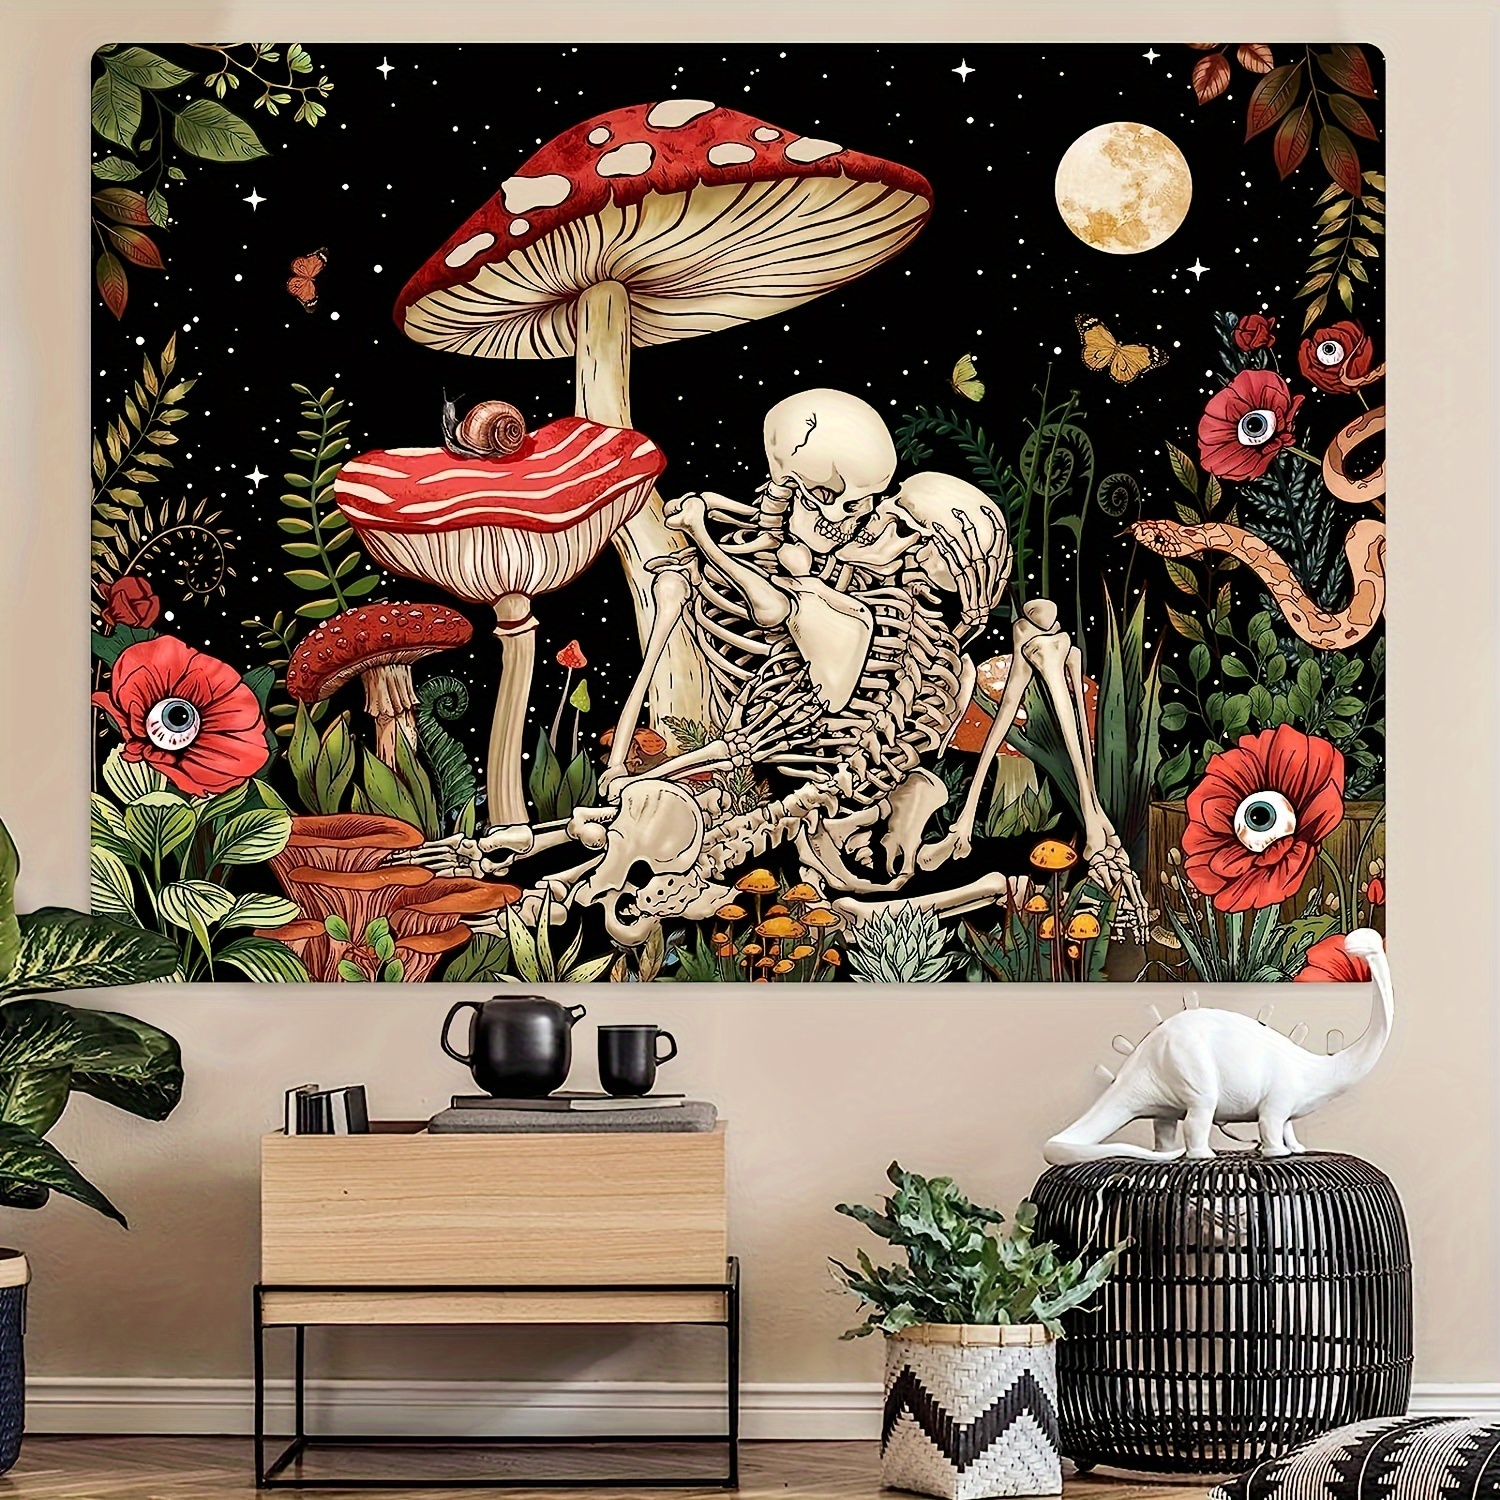 Castle Fairy Skull Flame Tapestry Cool Drum Kit Tapesrties Décor Living  Room Bedroom Rock Music Theme Wall Hangings Art Musical Instrument Tapestry